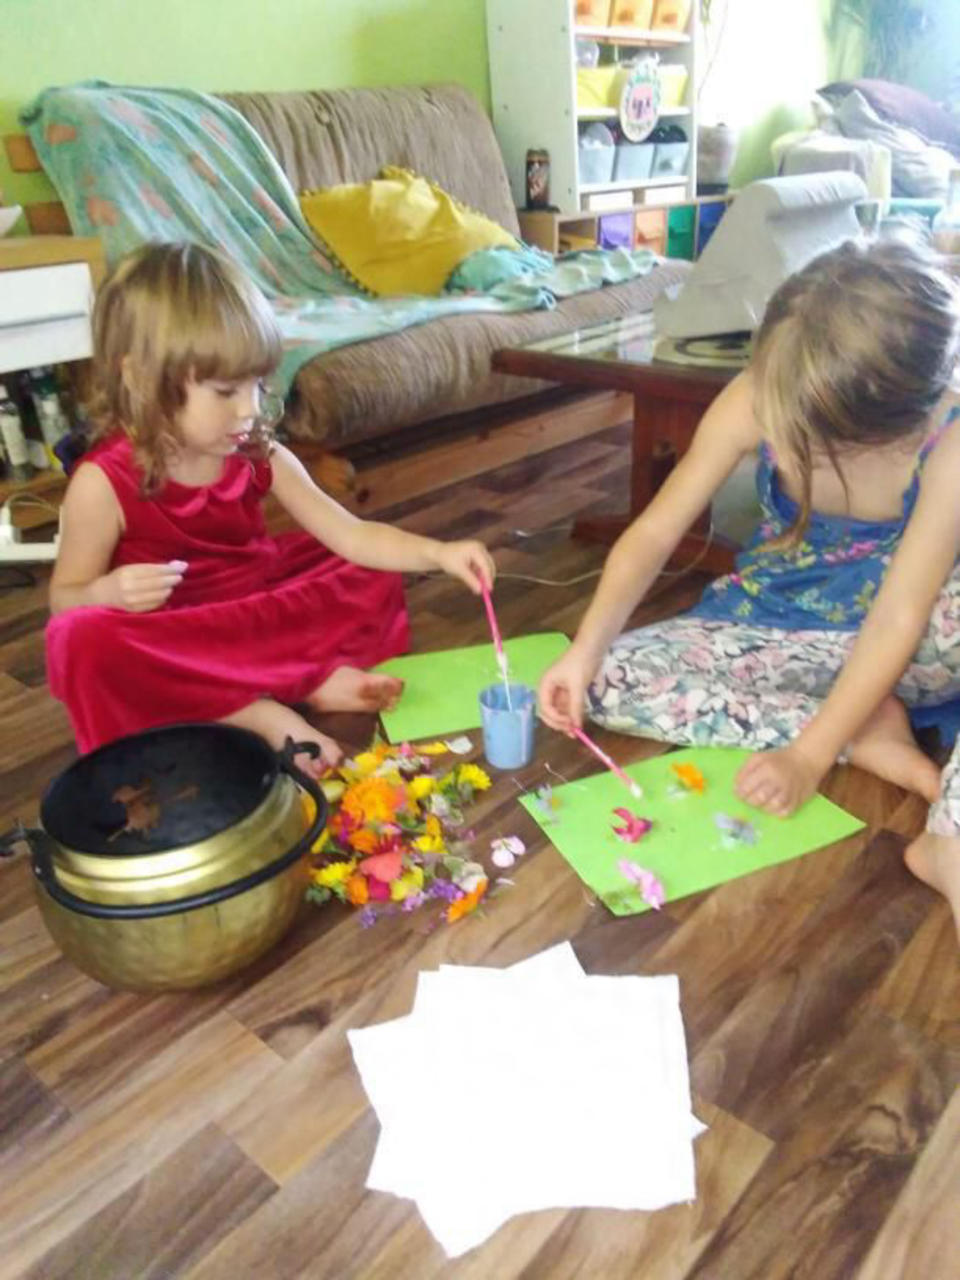 The children aren't in formal eduction, but their parents do help them learning, pictured L-R Kai and Ostara crafting together. (Caters)